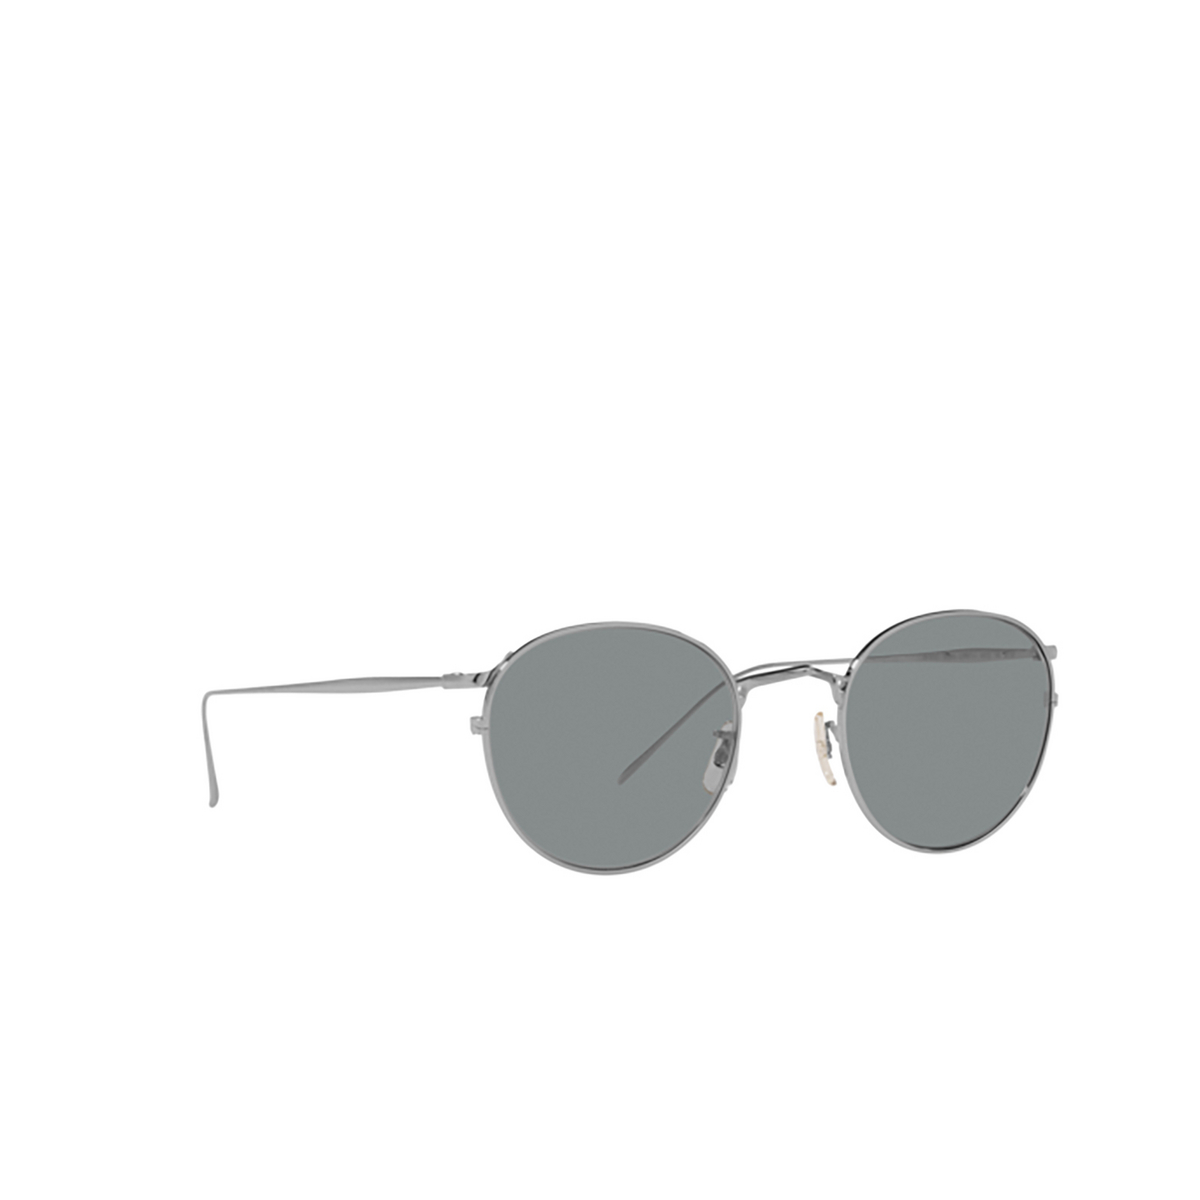 Oliver Peoples G. PONTI-4 Sunglasses 5036R5 Silver - three-quarters view